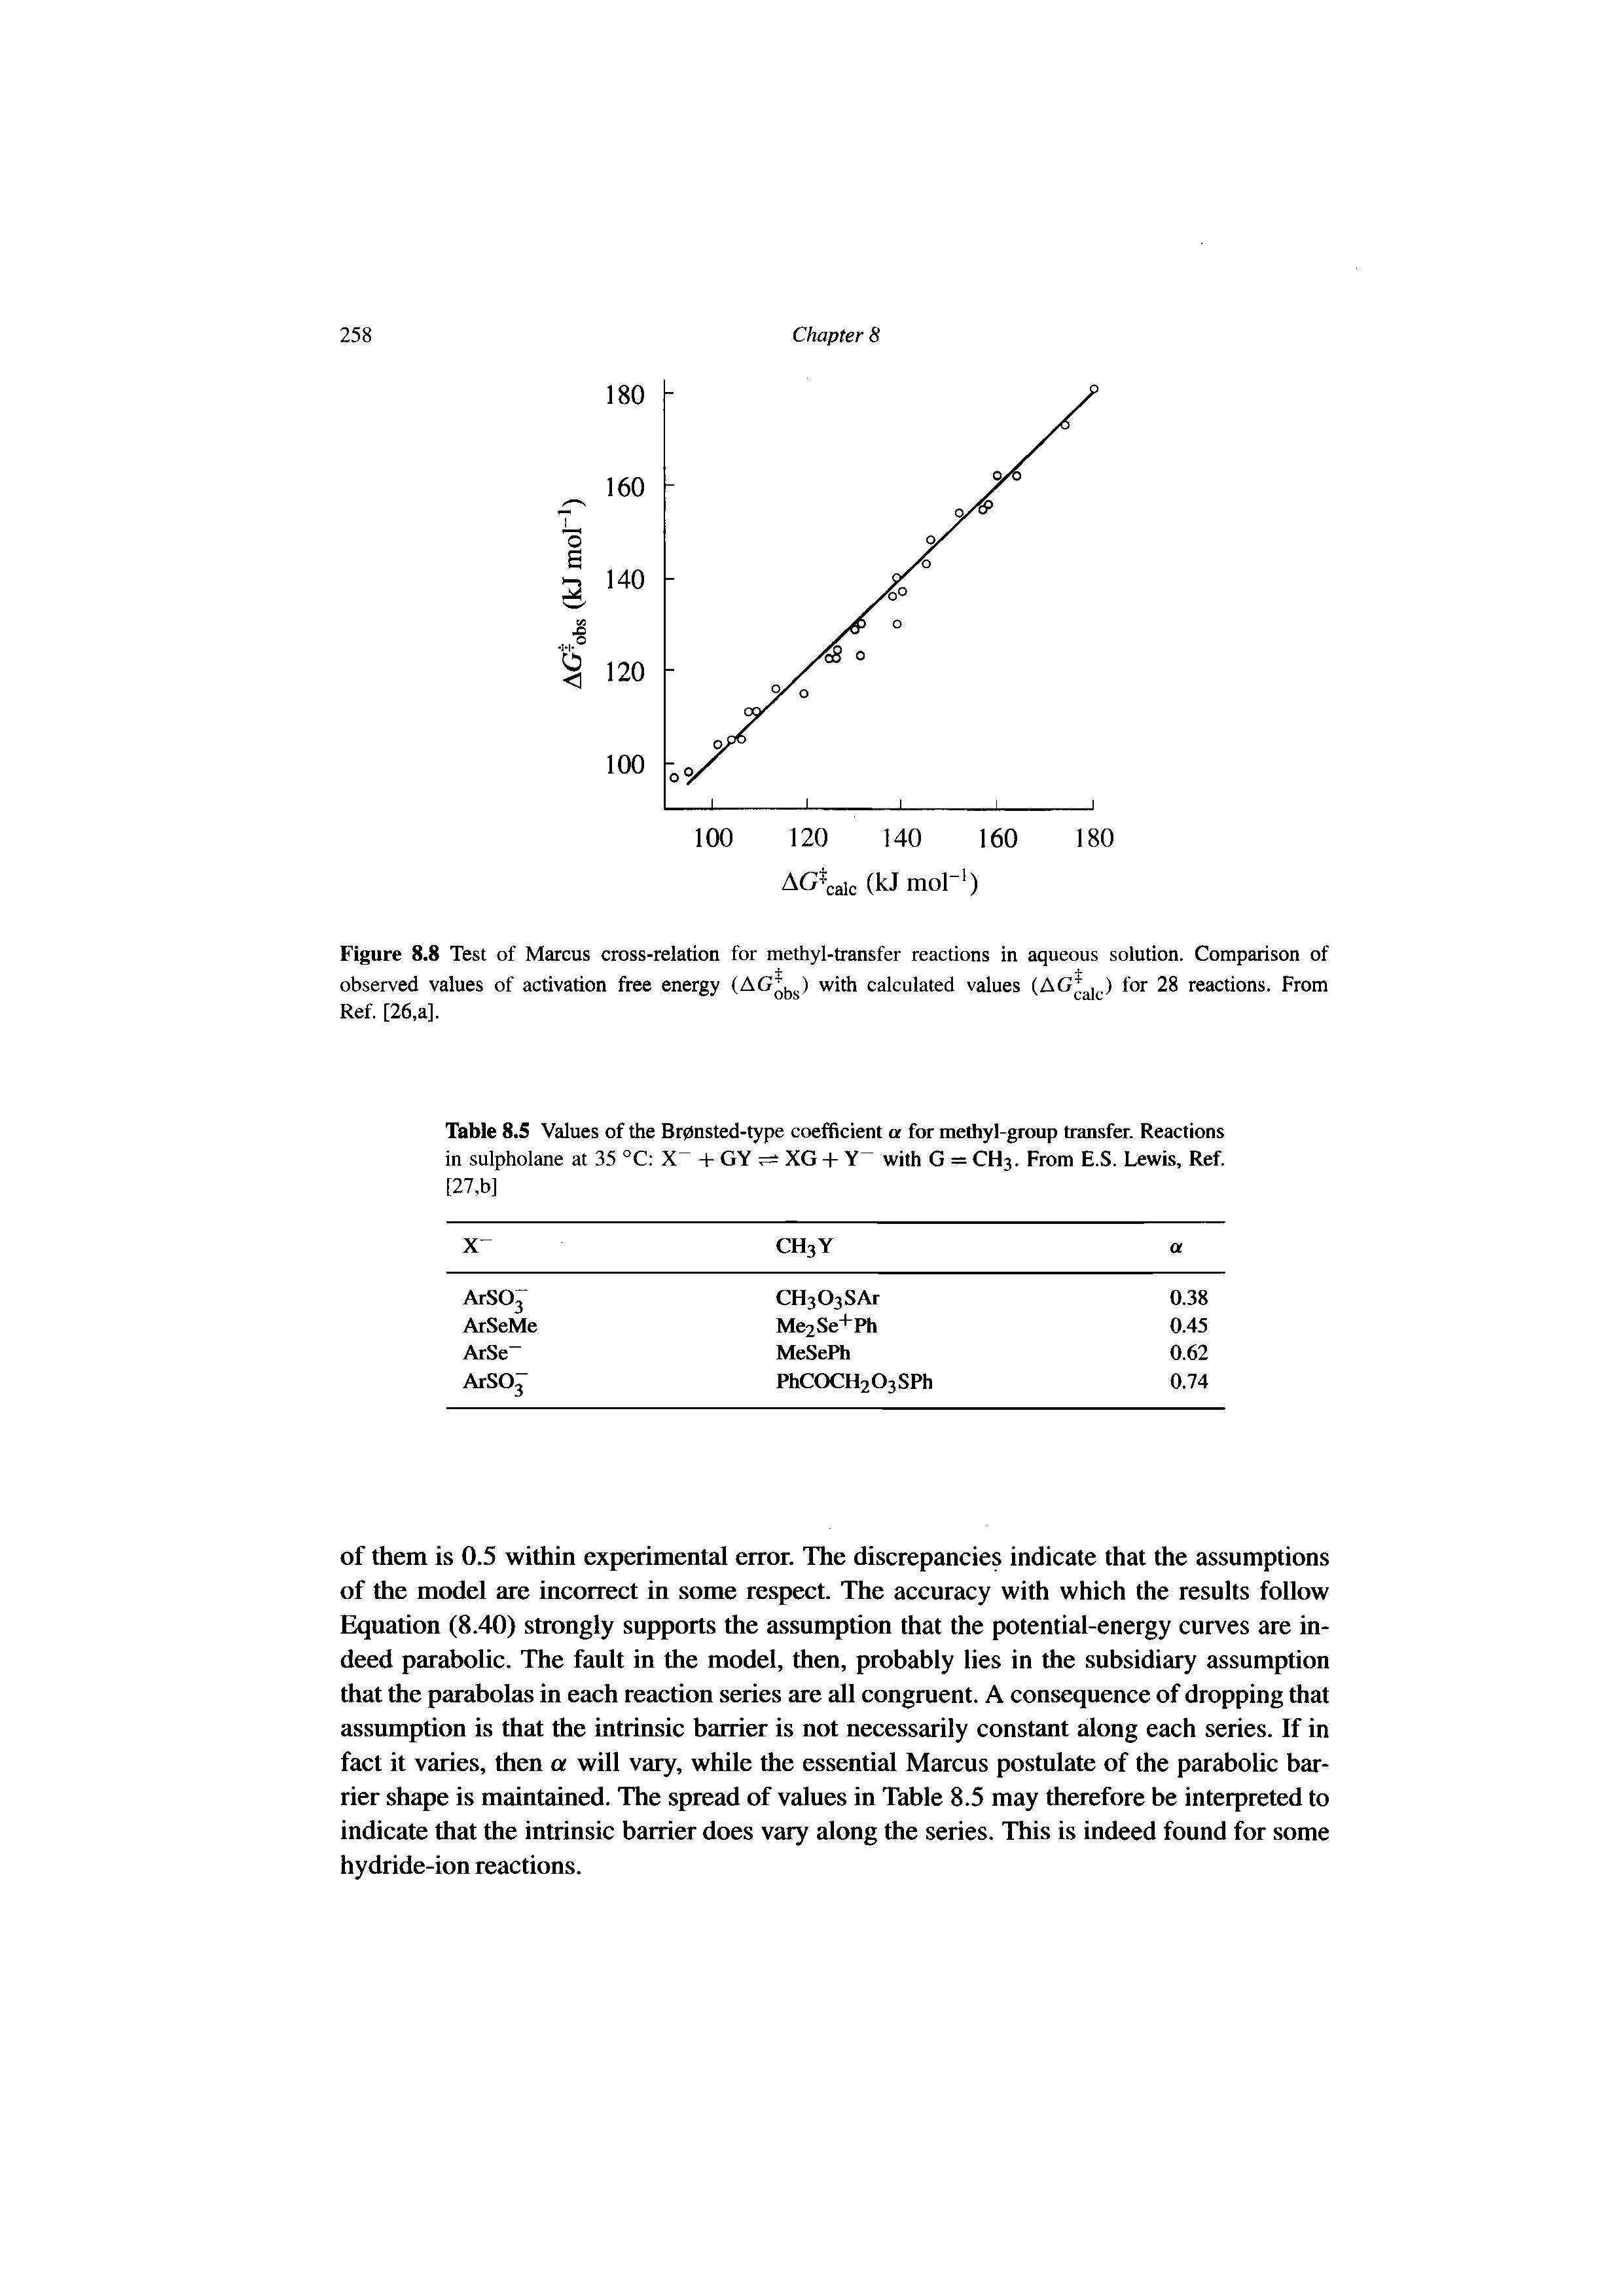 Table 8.5 Values of the Br0nsted-type coefbcient a for methyl-group transfer. Reactions in sulpholane at 35 °C X -t- GY XG - - Y with G = CH3. From E.S. Lewis, Ref.